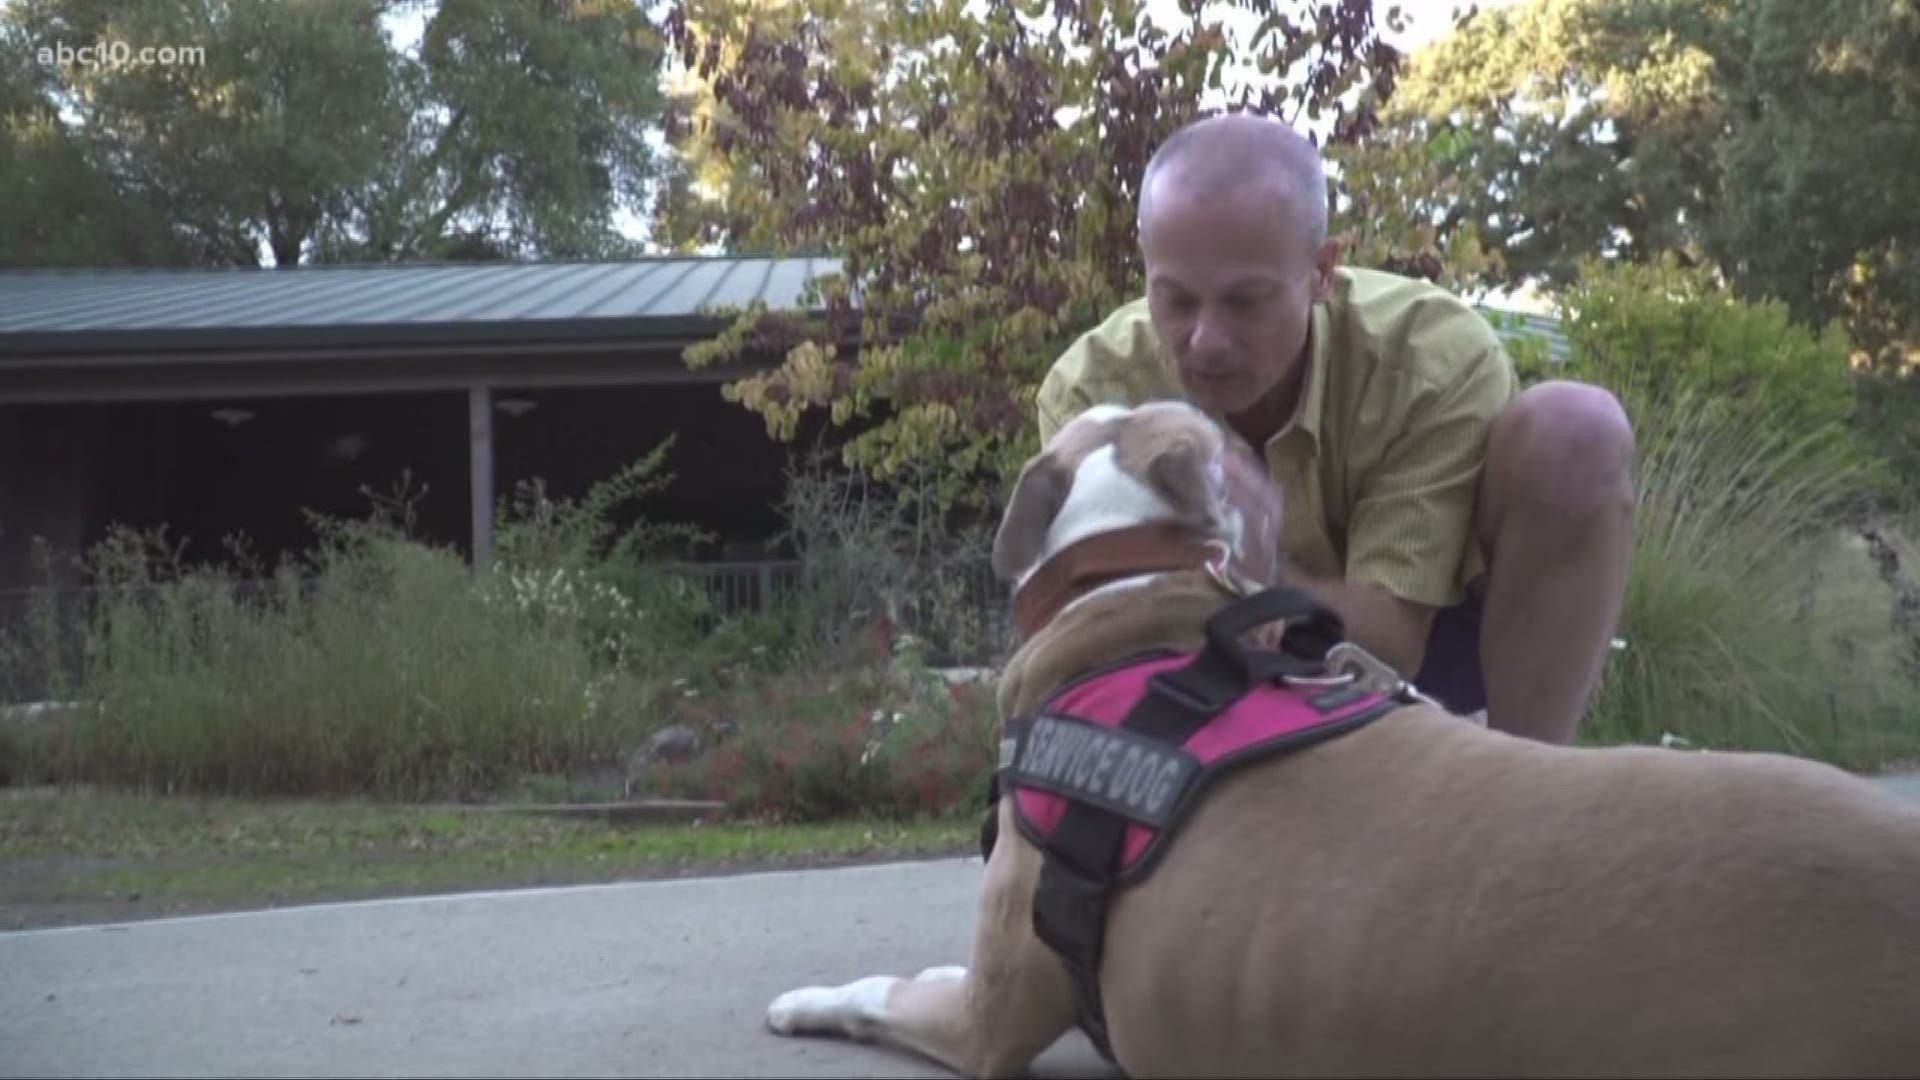 Veteran Bruce Steeves said he enjoys walking with his service dog, Bella, around Effie Yeaw Nature Center. But last week, he said he was harassed by a volunteer for having her in the park.